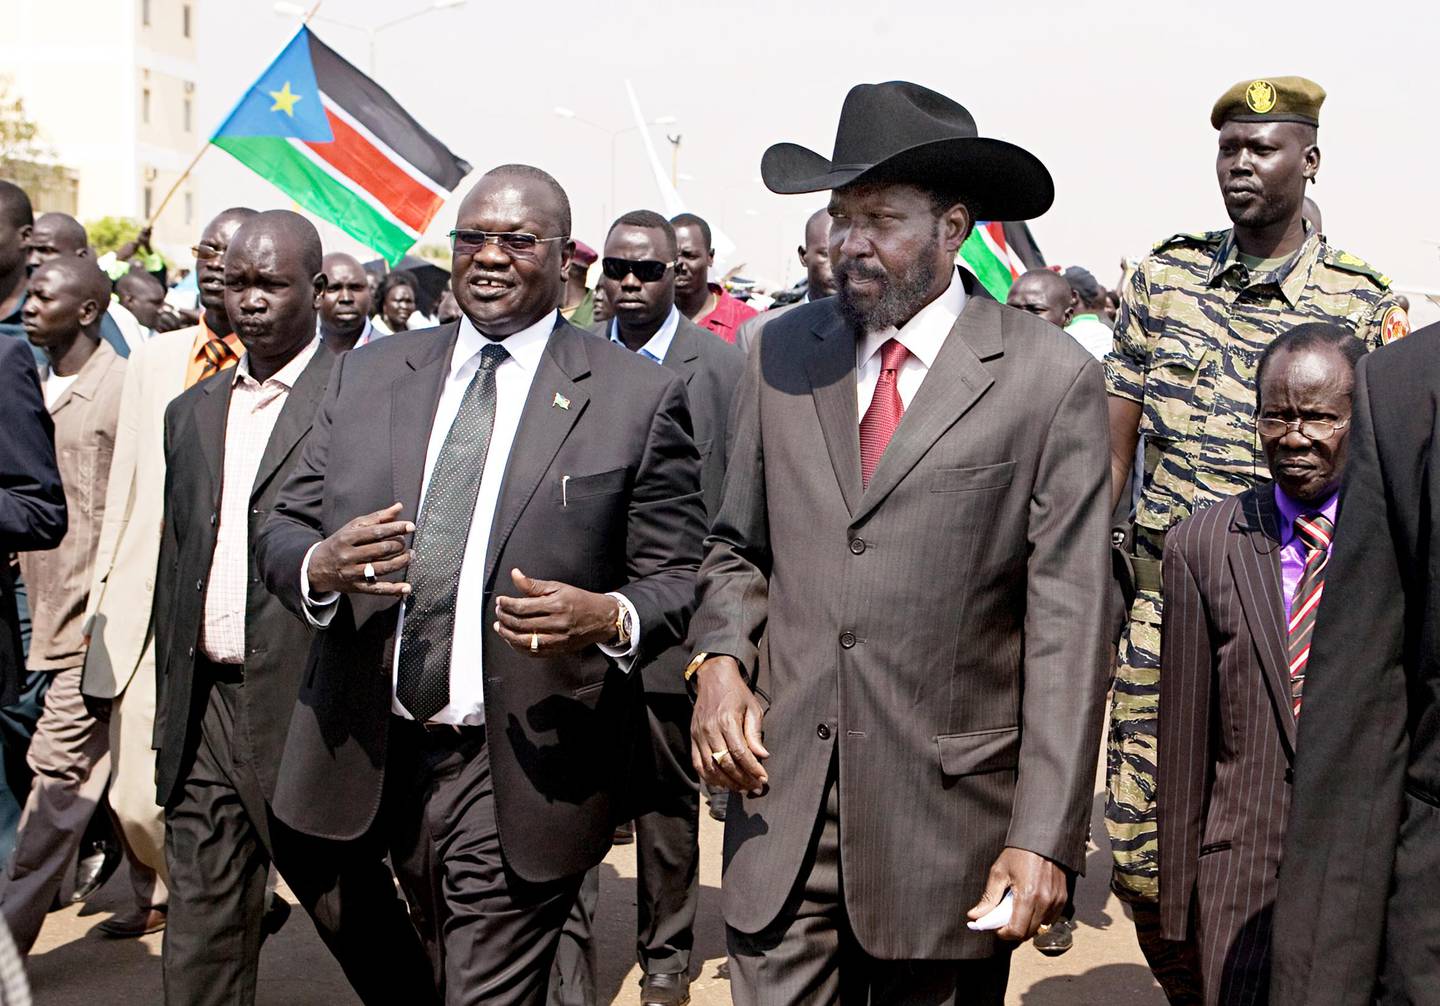 FILE - In this Tuesday, Feb. 8, 2011 file photo, South Sudanese President Salva Kiir, centre-right, is greeted by then Vice-President Riek Machar, centre-left, on Kiir's return to Juba, South Sudan, from Khartoum where he attended the formal announcement of southern Sudan's referendum results. South Sudan President Salva Kiir signed a peace deal with rebels Wednesday, Aug. 26, 2015 in a ceremony witnessed by regional leaders in the capital Juba, after 20 months since the start of fighting between loyalist forces and rebels led by his former deputy Riek Machar. (AP Photo/Pete Muller, File)